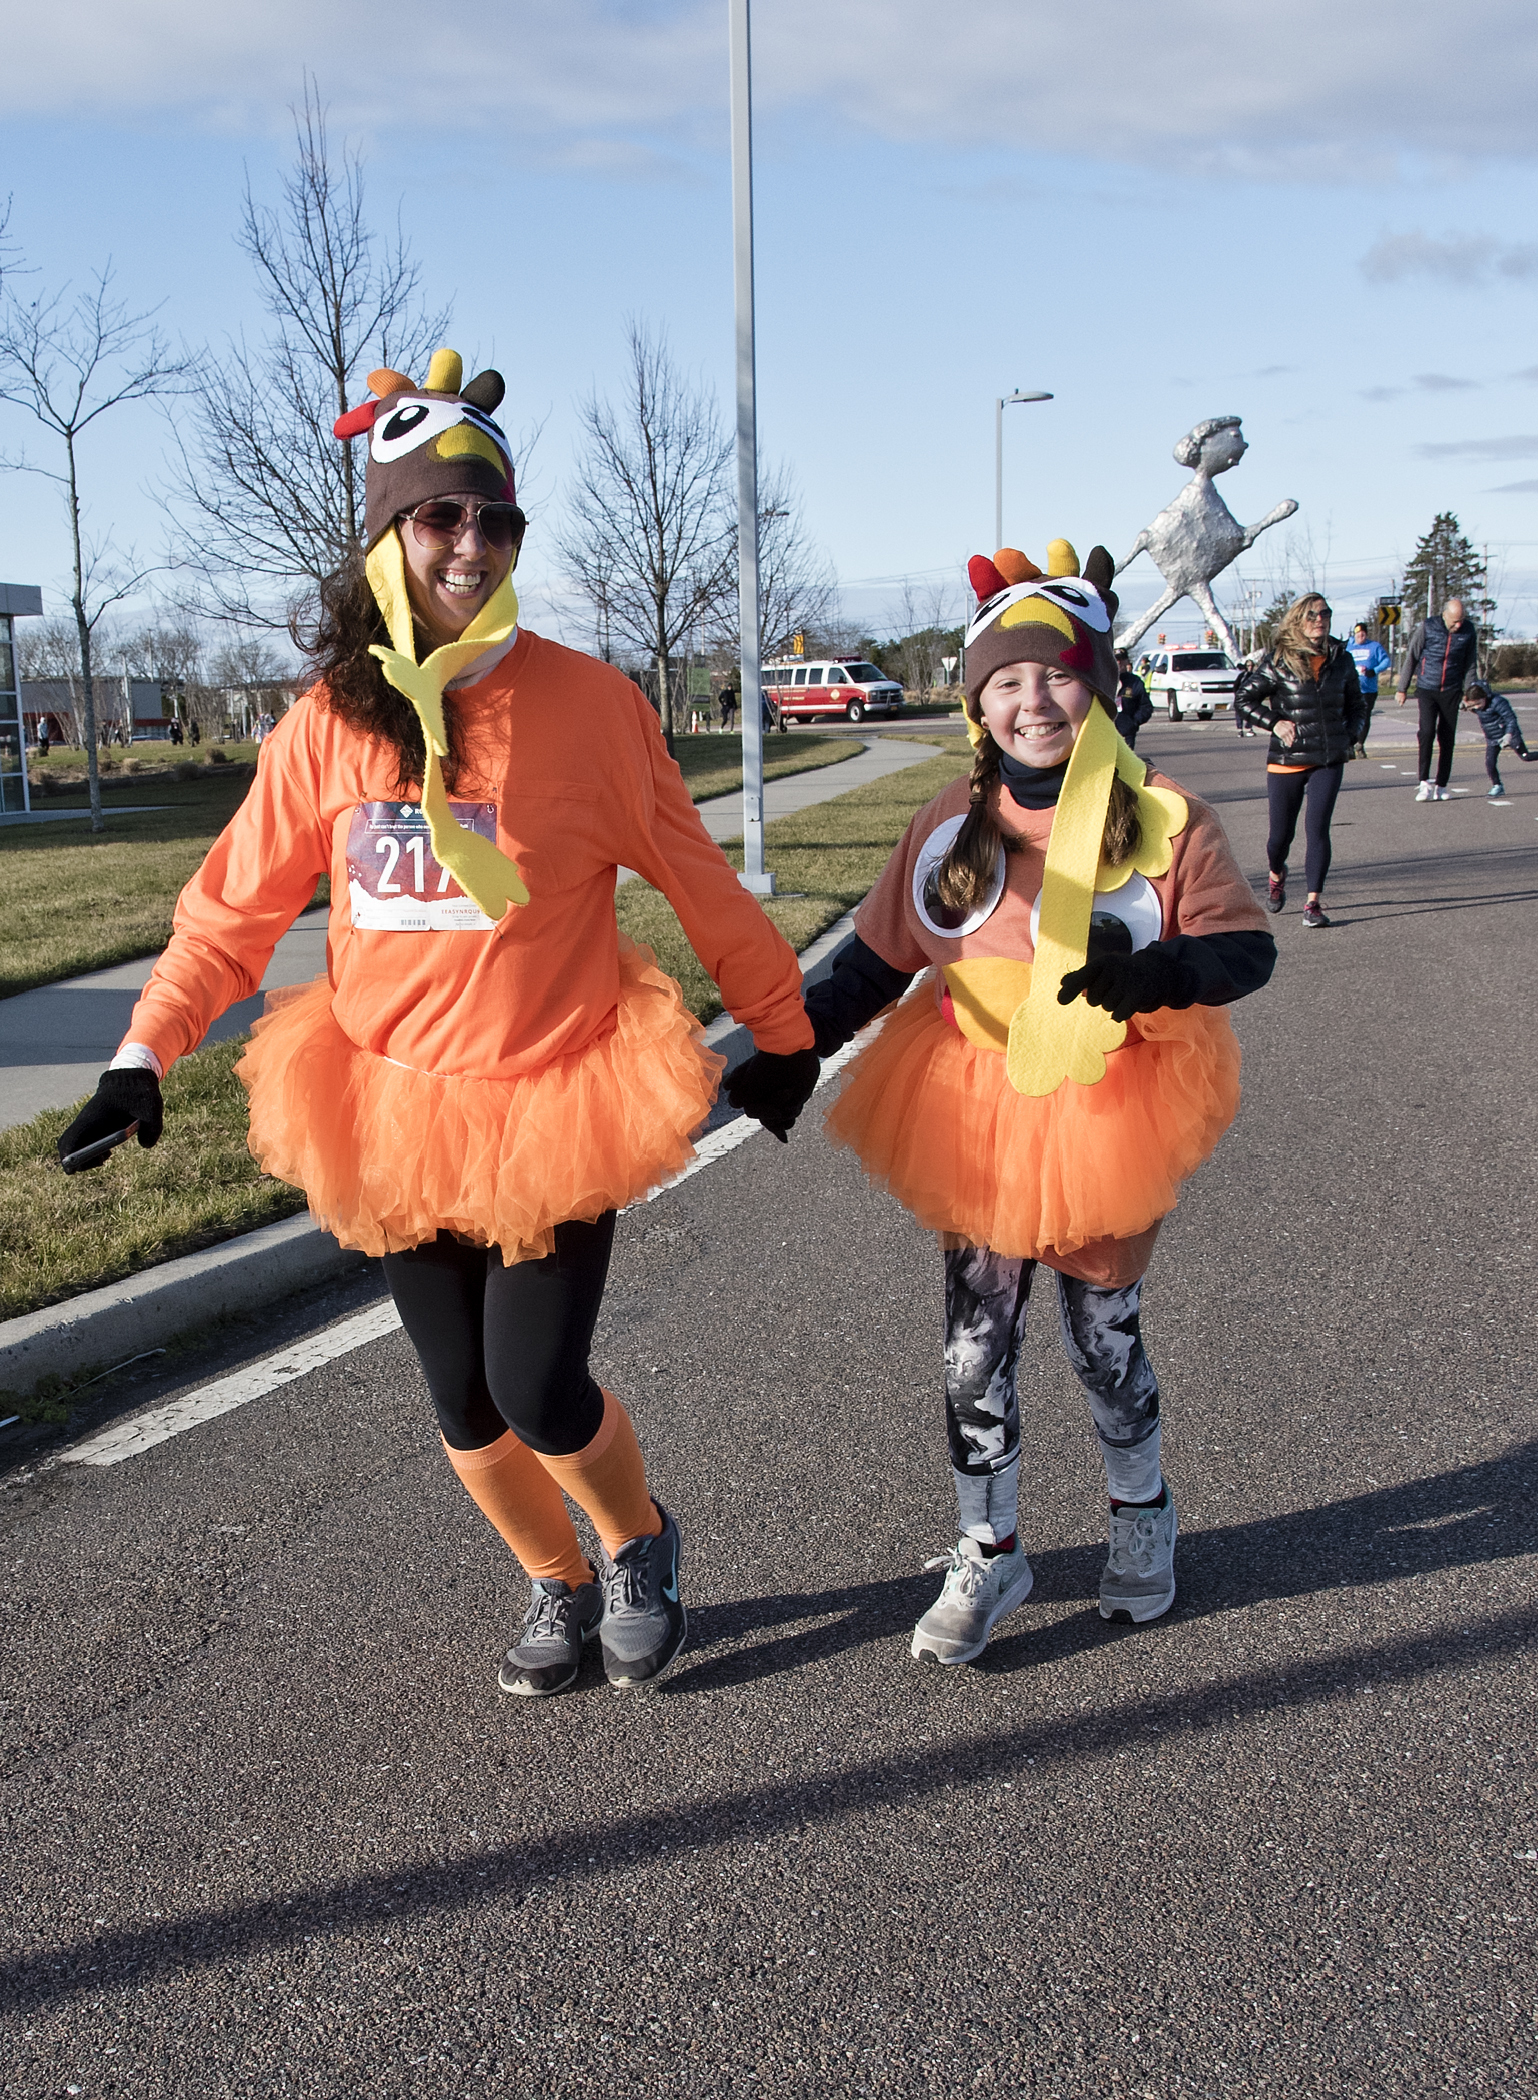 There was a lot of Thanksgiving spirit at the Turkey Trot 5K walk/run organized by the VFW Post 7009 at Gabreski Airport in Westhampton Beach. JOHN NEELY PHOTOS